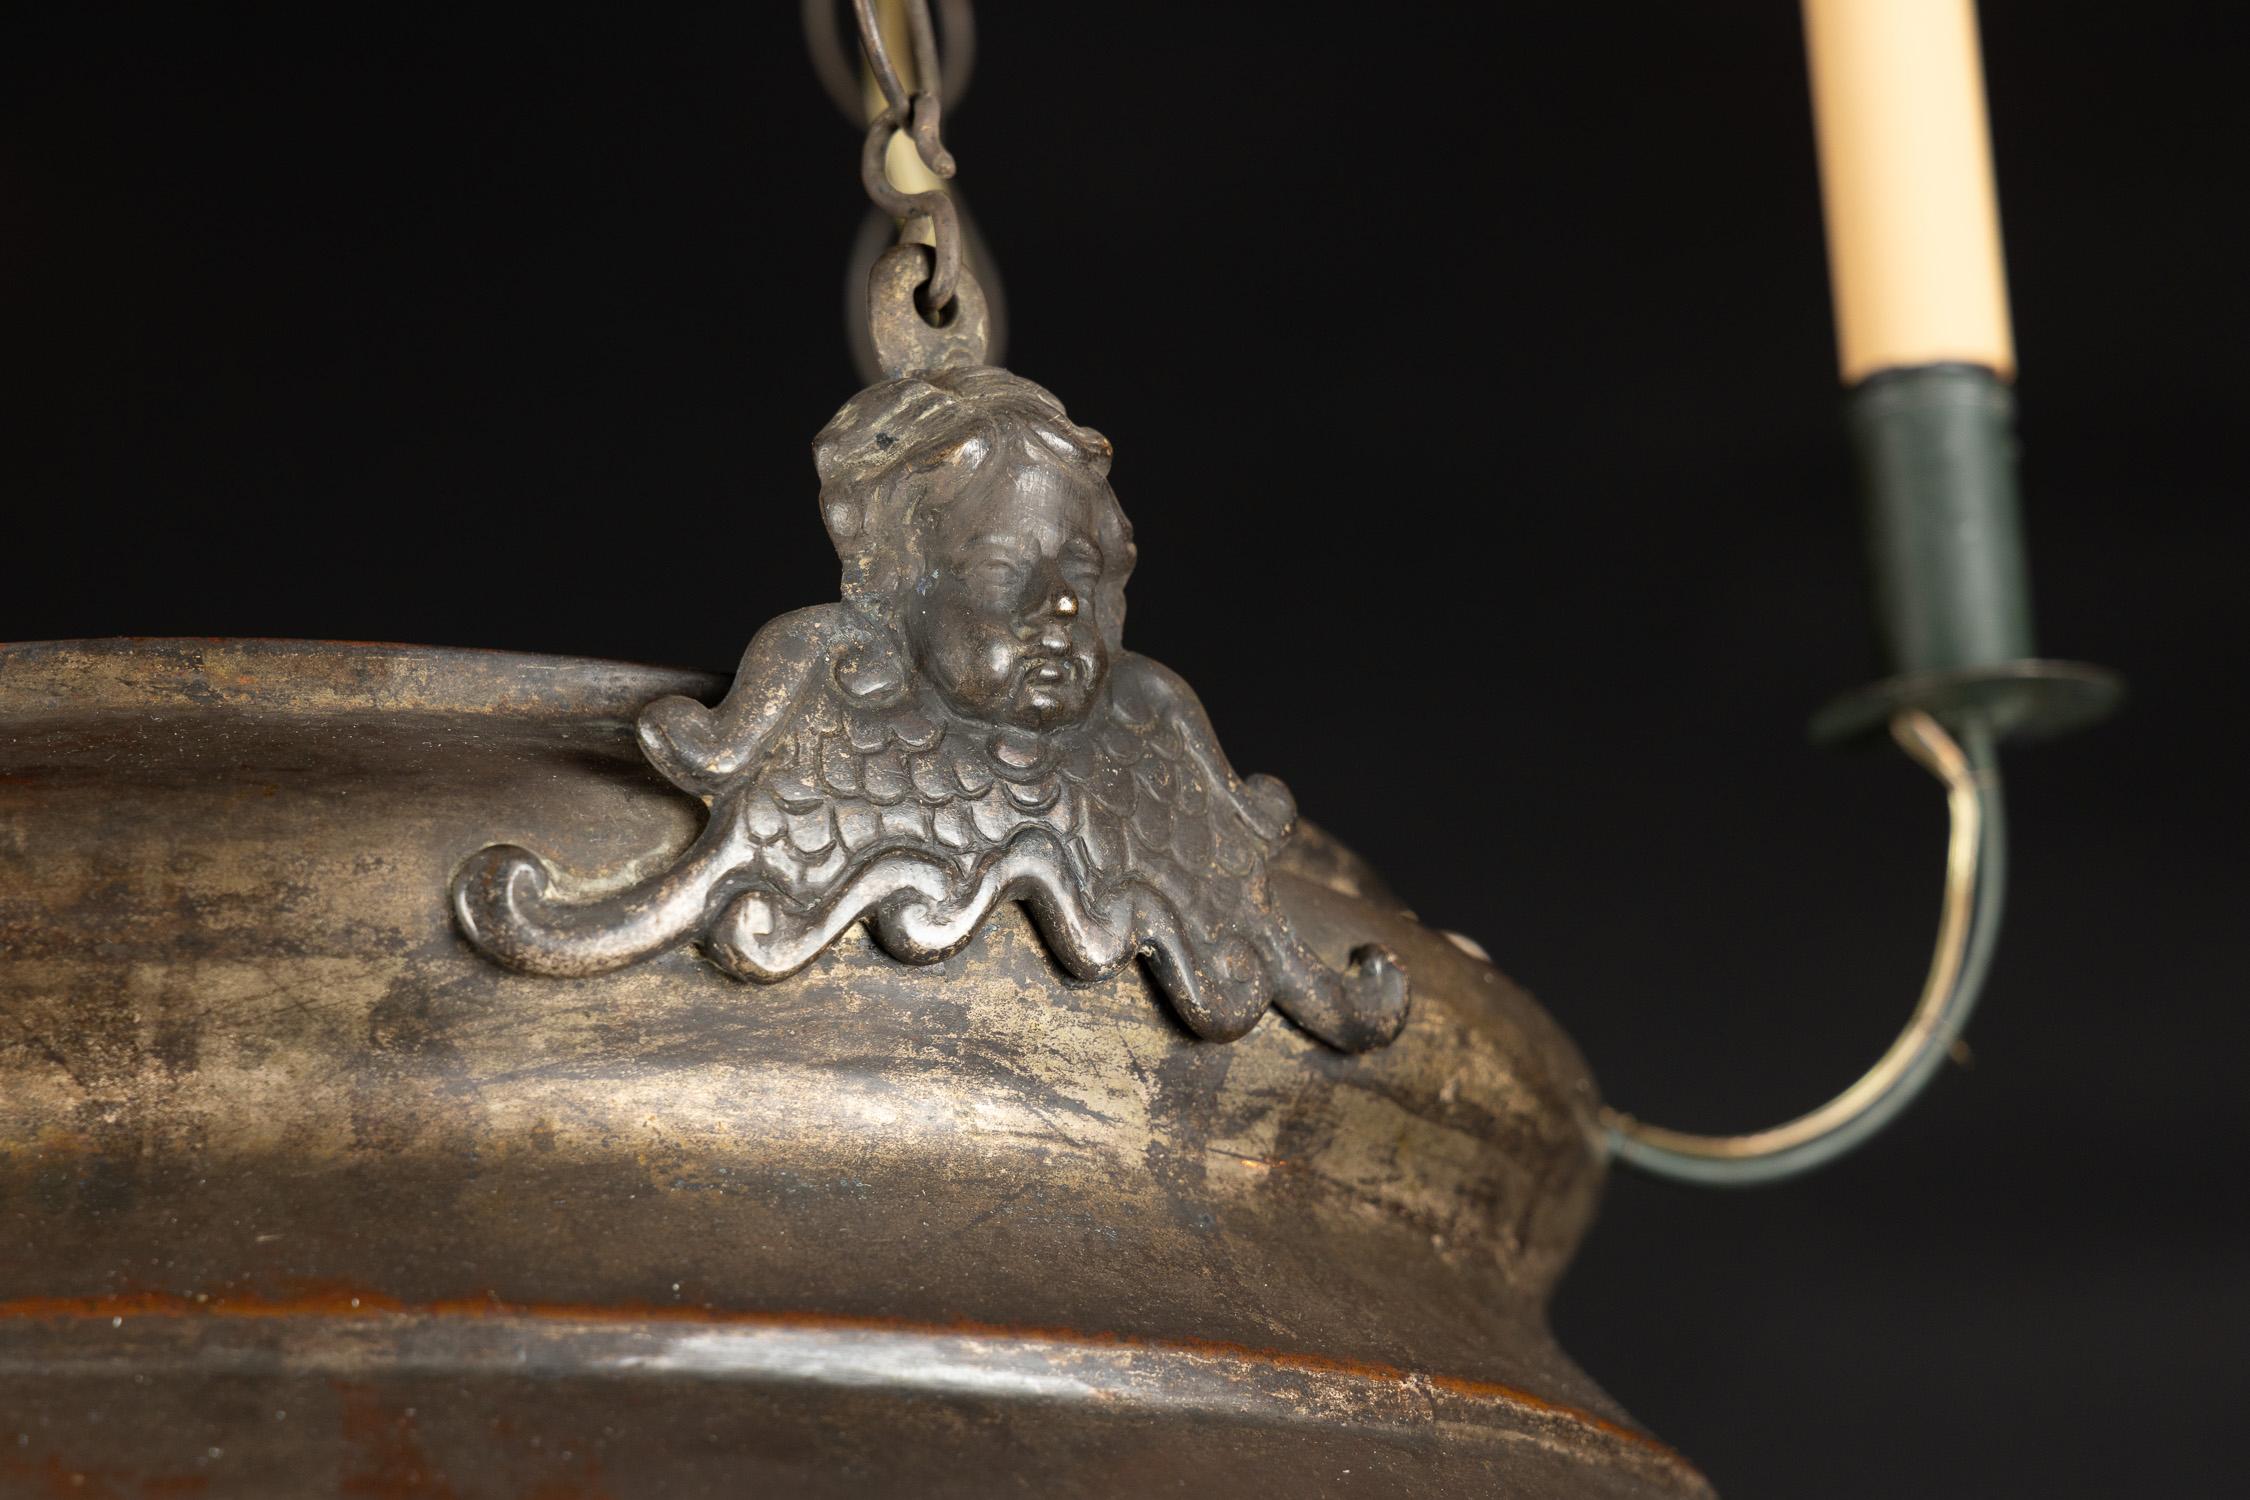 This grand hanging lantern was once an incense burning sanctuary lamp, and is made of brass sporting a beautiful dark patina. The French antique piece dates back to the 19th century and is embellished with hand-chiseled Moorish designs on the large